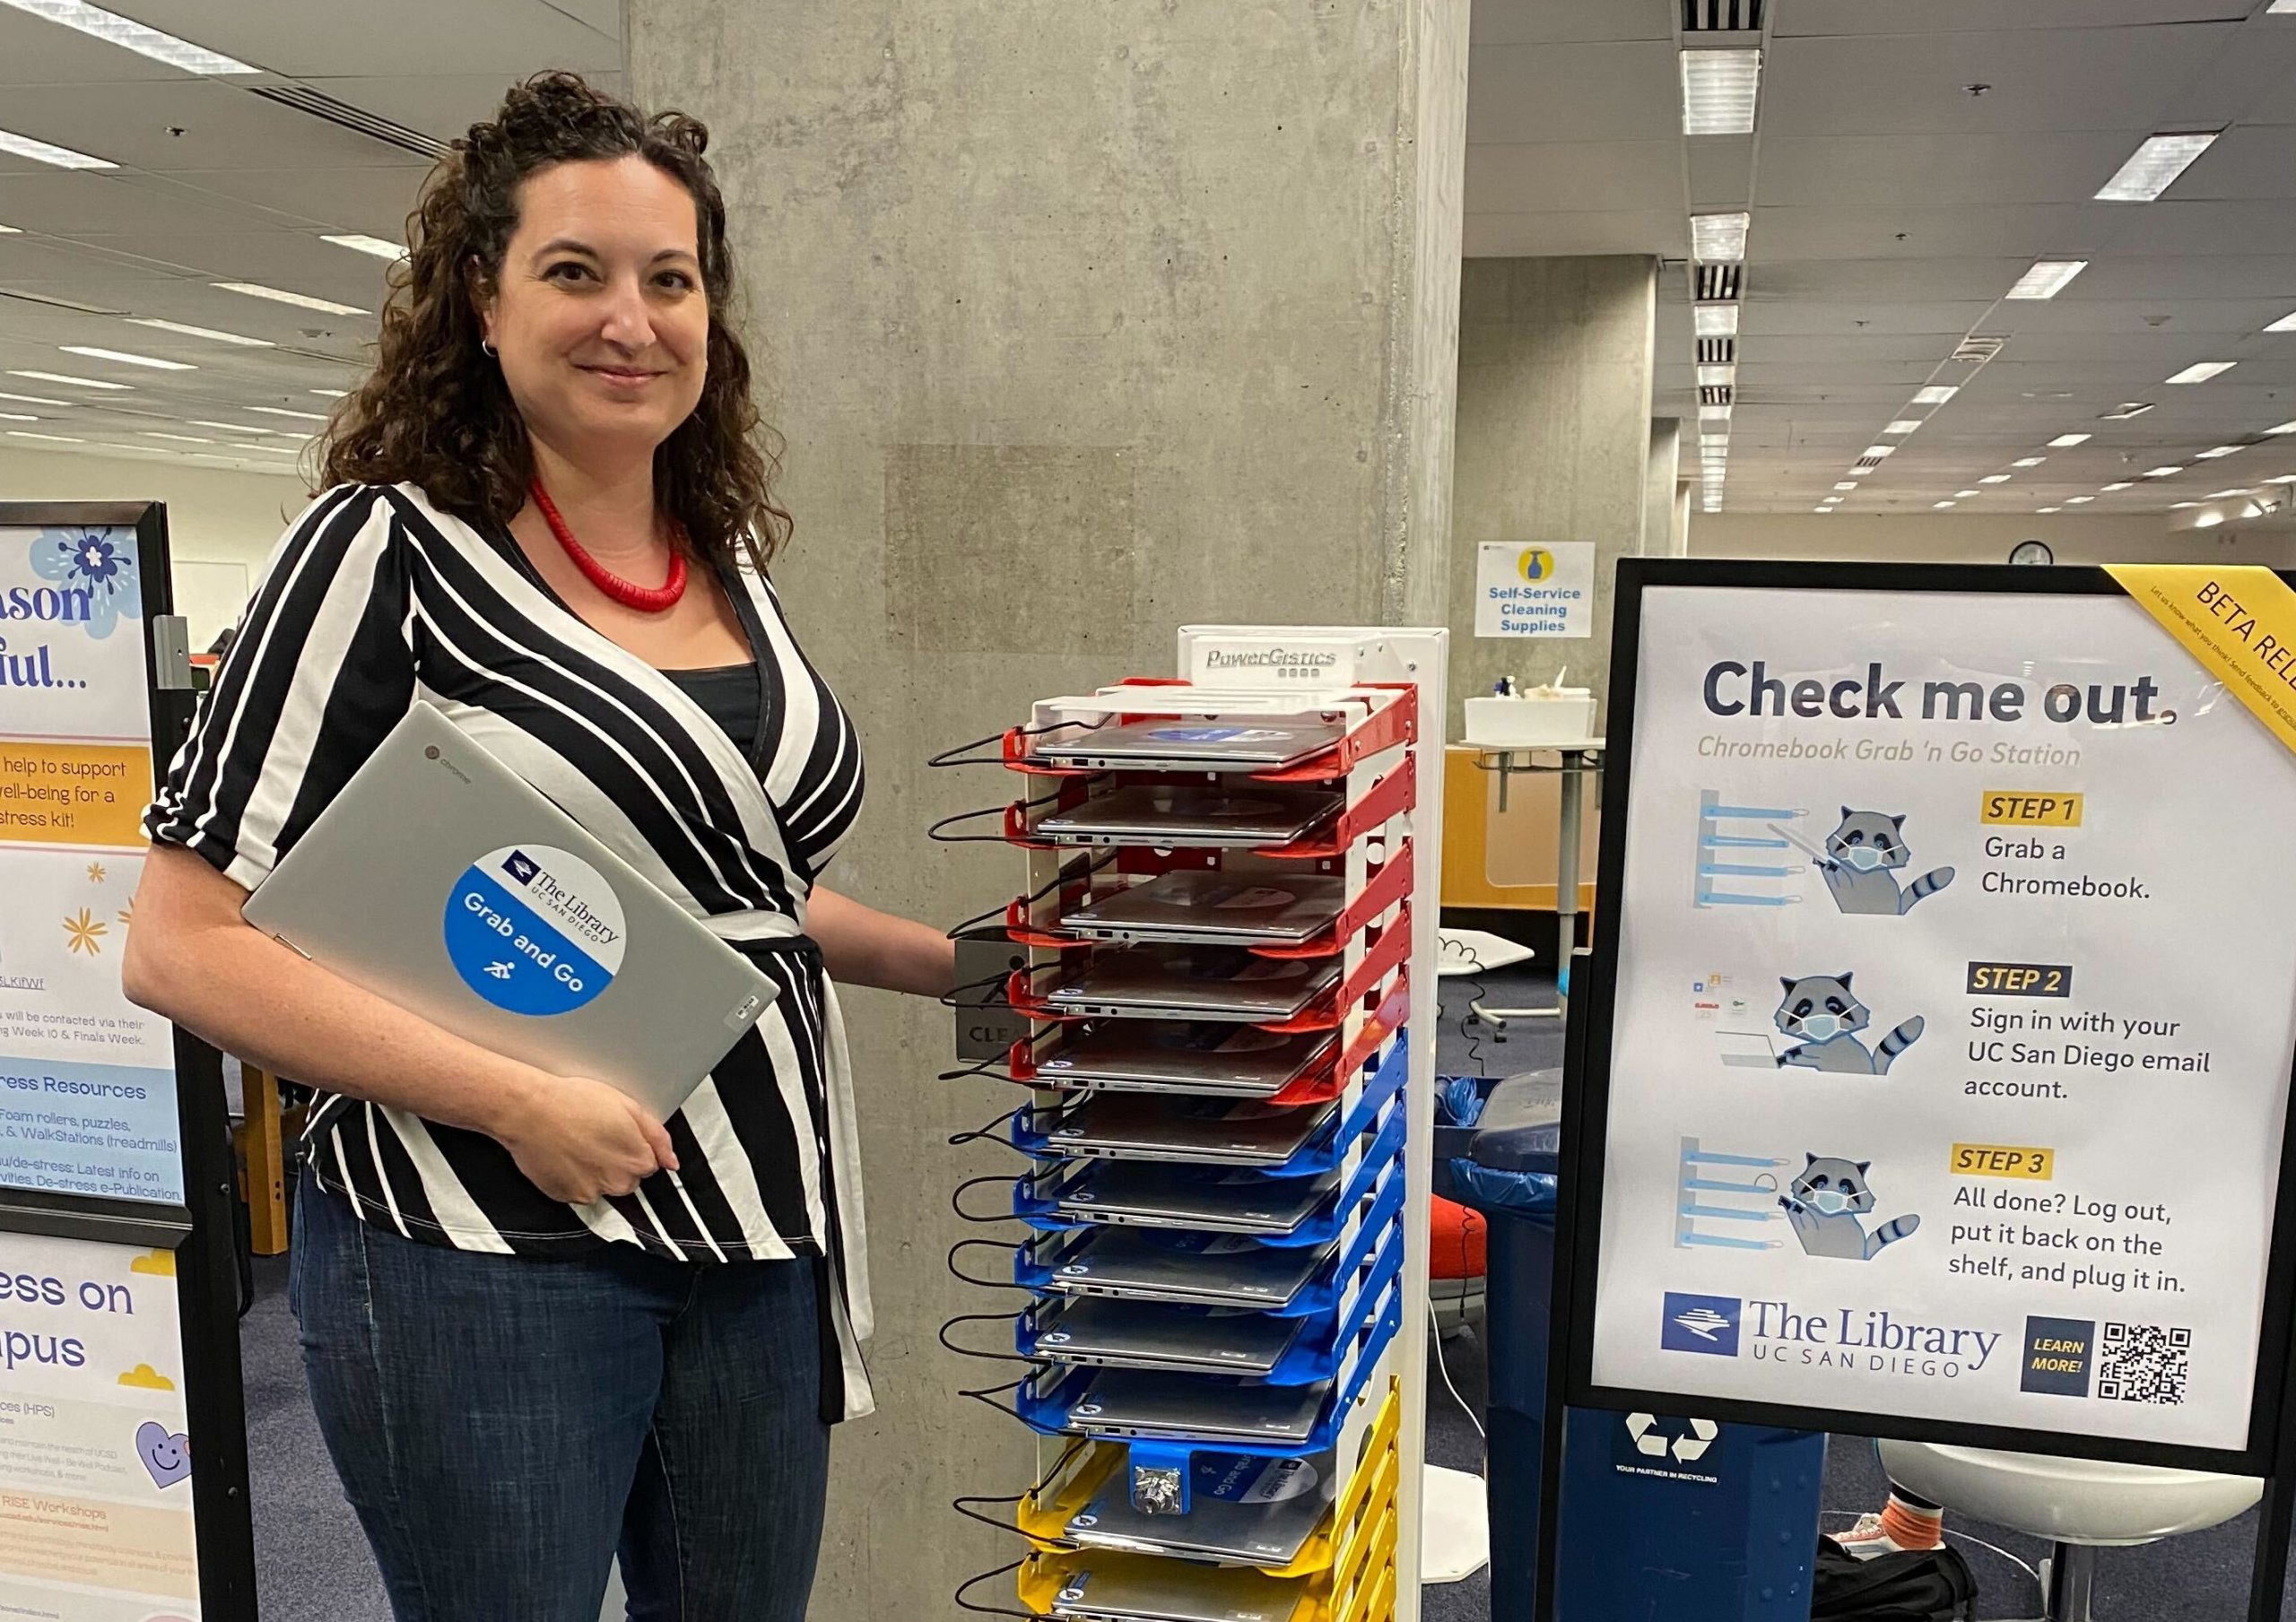 Allison Flick, manager of Service Operations for the UC San Diego Library, holding a Chromebook and standing next to a Chromebook loan station in Geisel Library.